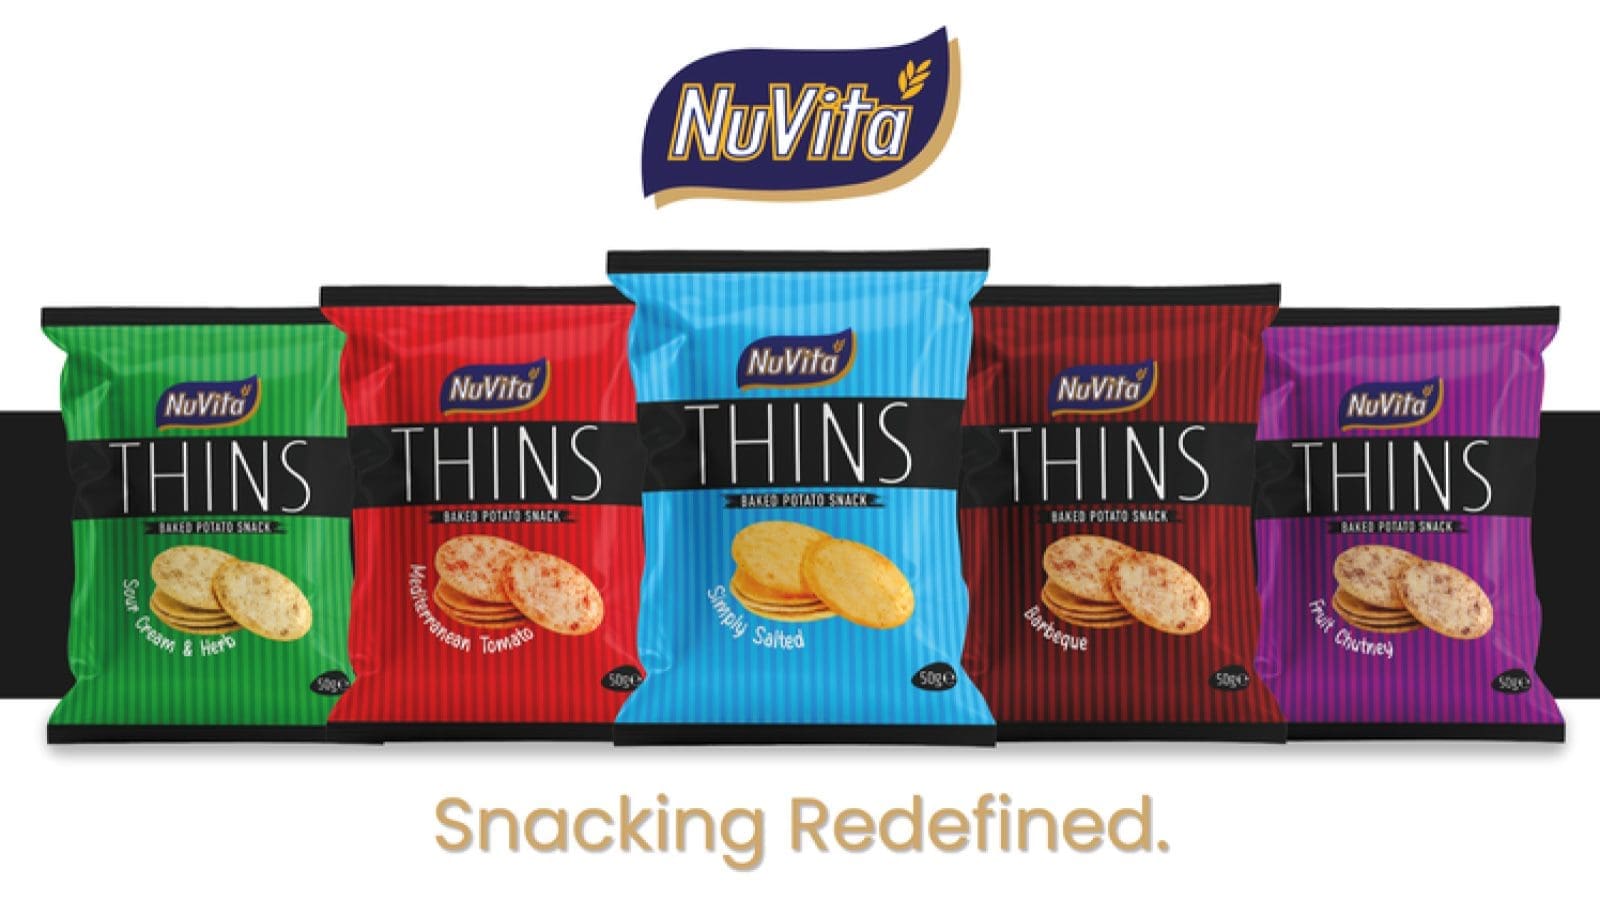 Malbros Africa expands Nuvita Brand with Nuvita Thins